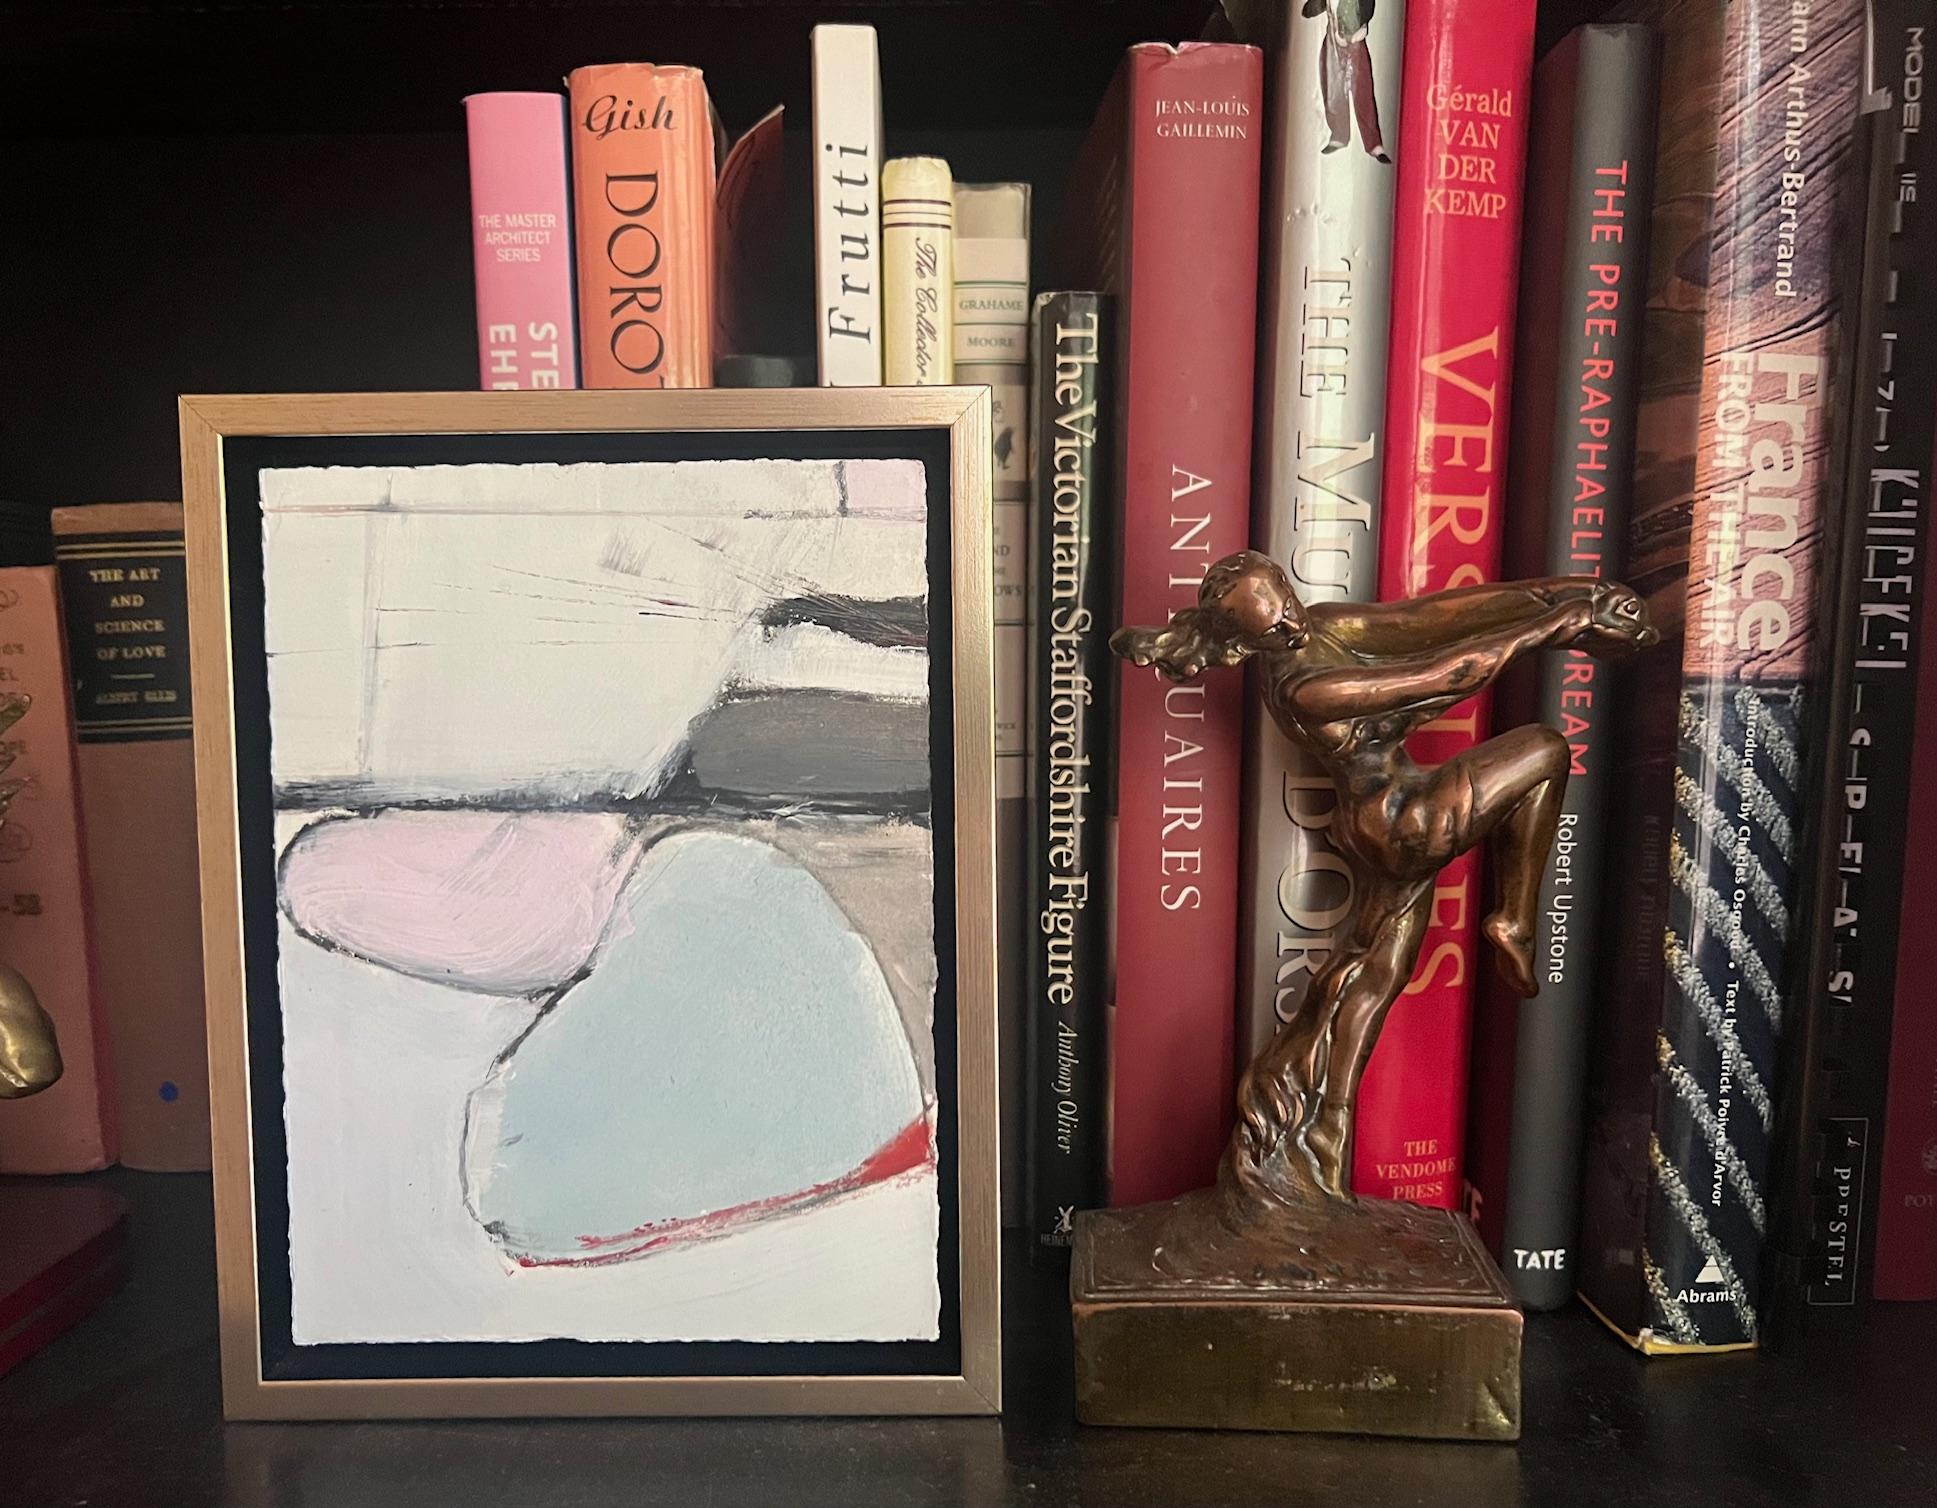 Mixed media on paper in float frame by San Francisco Bay Area artist Maria Burtis.  Modern art piece with shades of pink blue, gray, and red, titled 